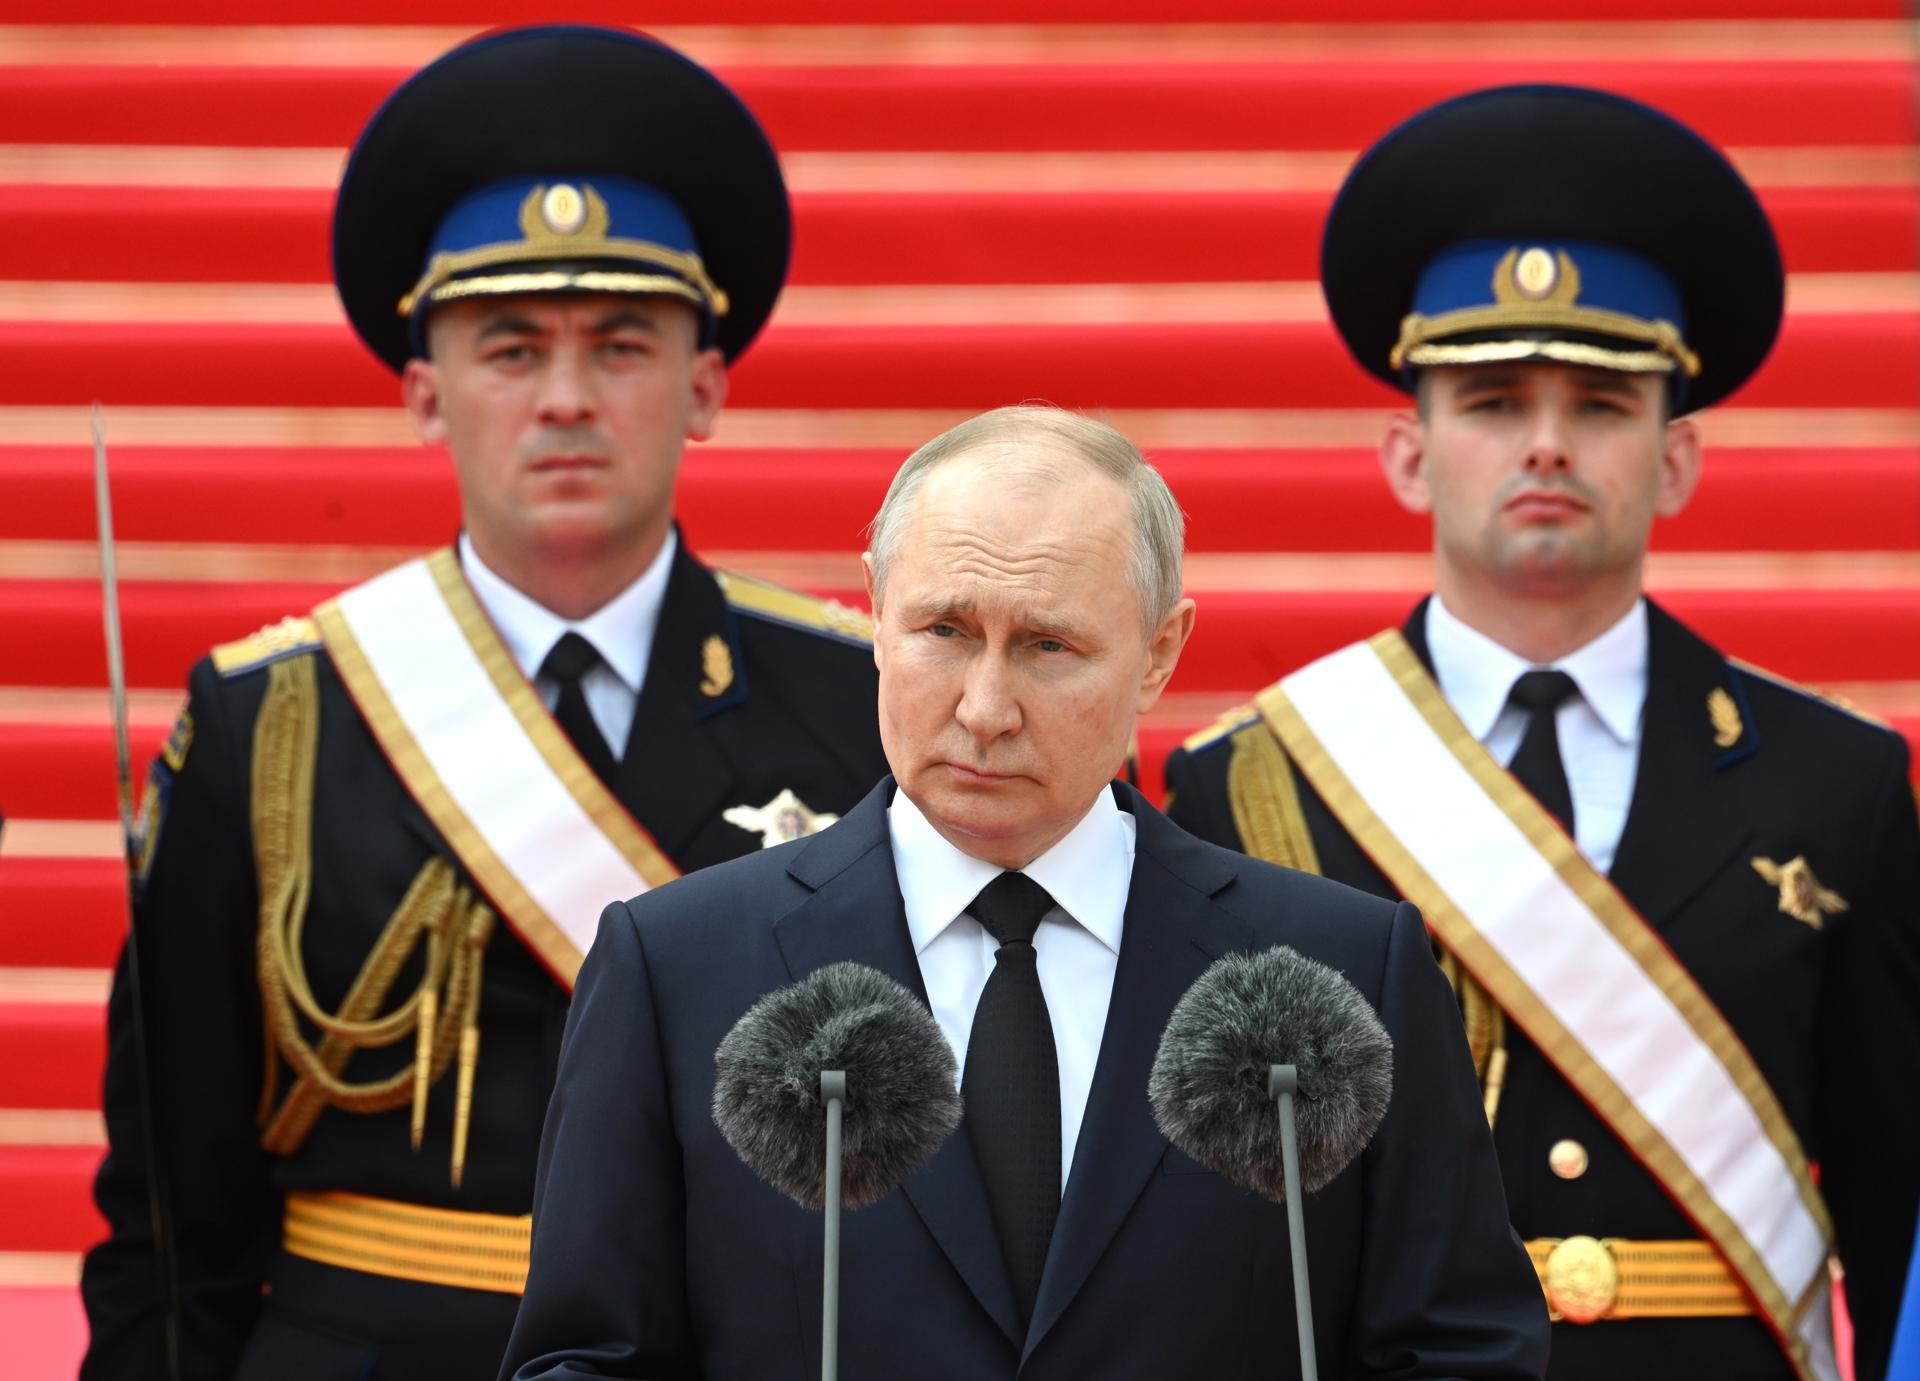 Russian President Vladimir Putin addressing units of the Russian Defence Ministry, the Russian National Guard Troops (Rosgvardiya), the Russian Ministry of Internal Affairs (MVD), the Russian Federal Security Service (FSB) and the Russian Federal Protective Service (FSO), who ensured order and legality during the mutiny, at the Kremlin, in Moscow, Russia, 27 June 2023. EFE-EPA/SPUTNIK/KREMLIN / POOL MANDATORY CREDIT